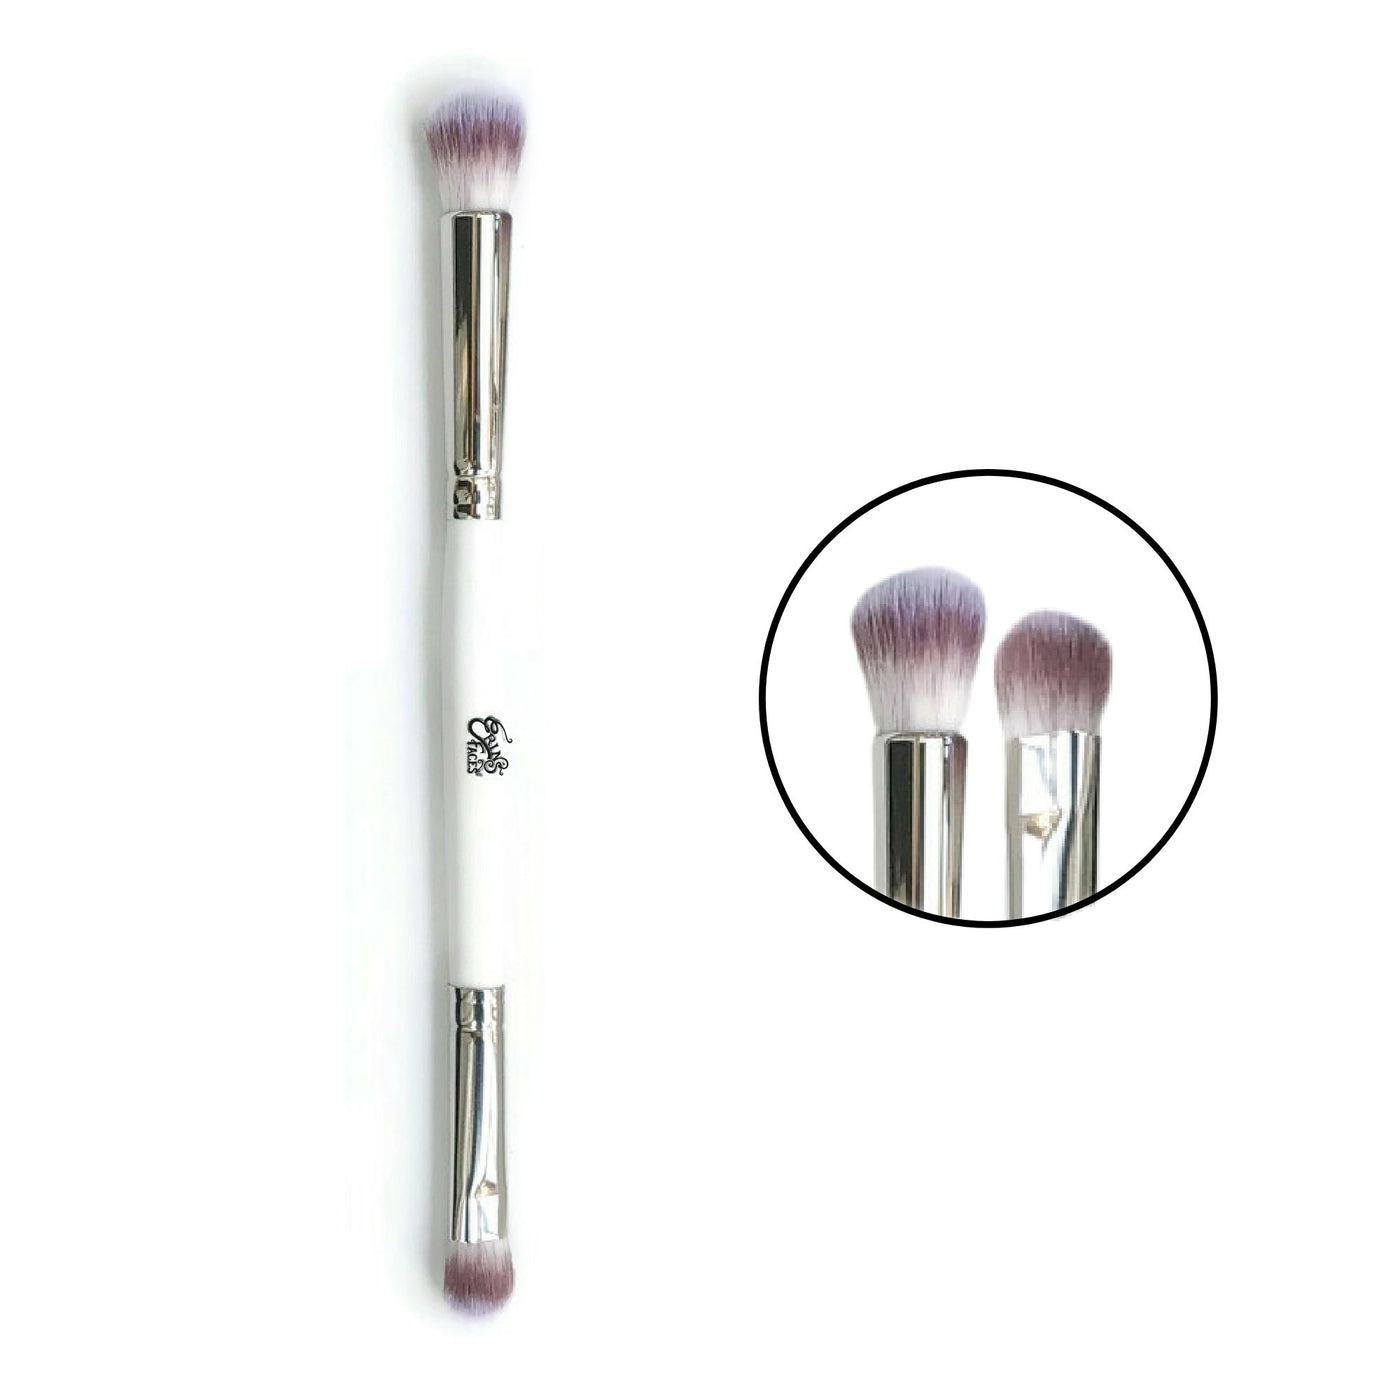 the double concealer brush with a magnified photo of the two brush heads